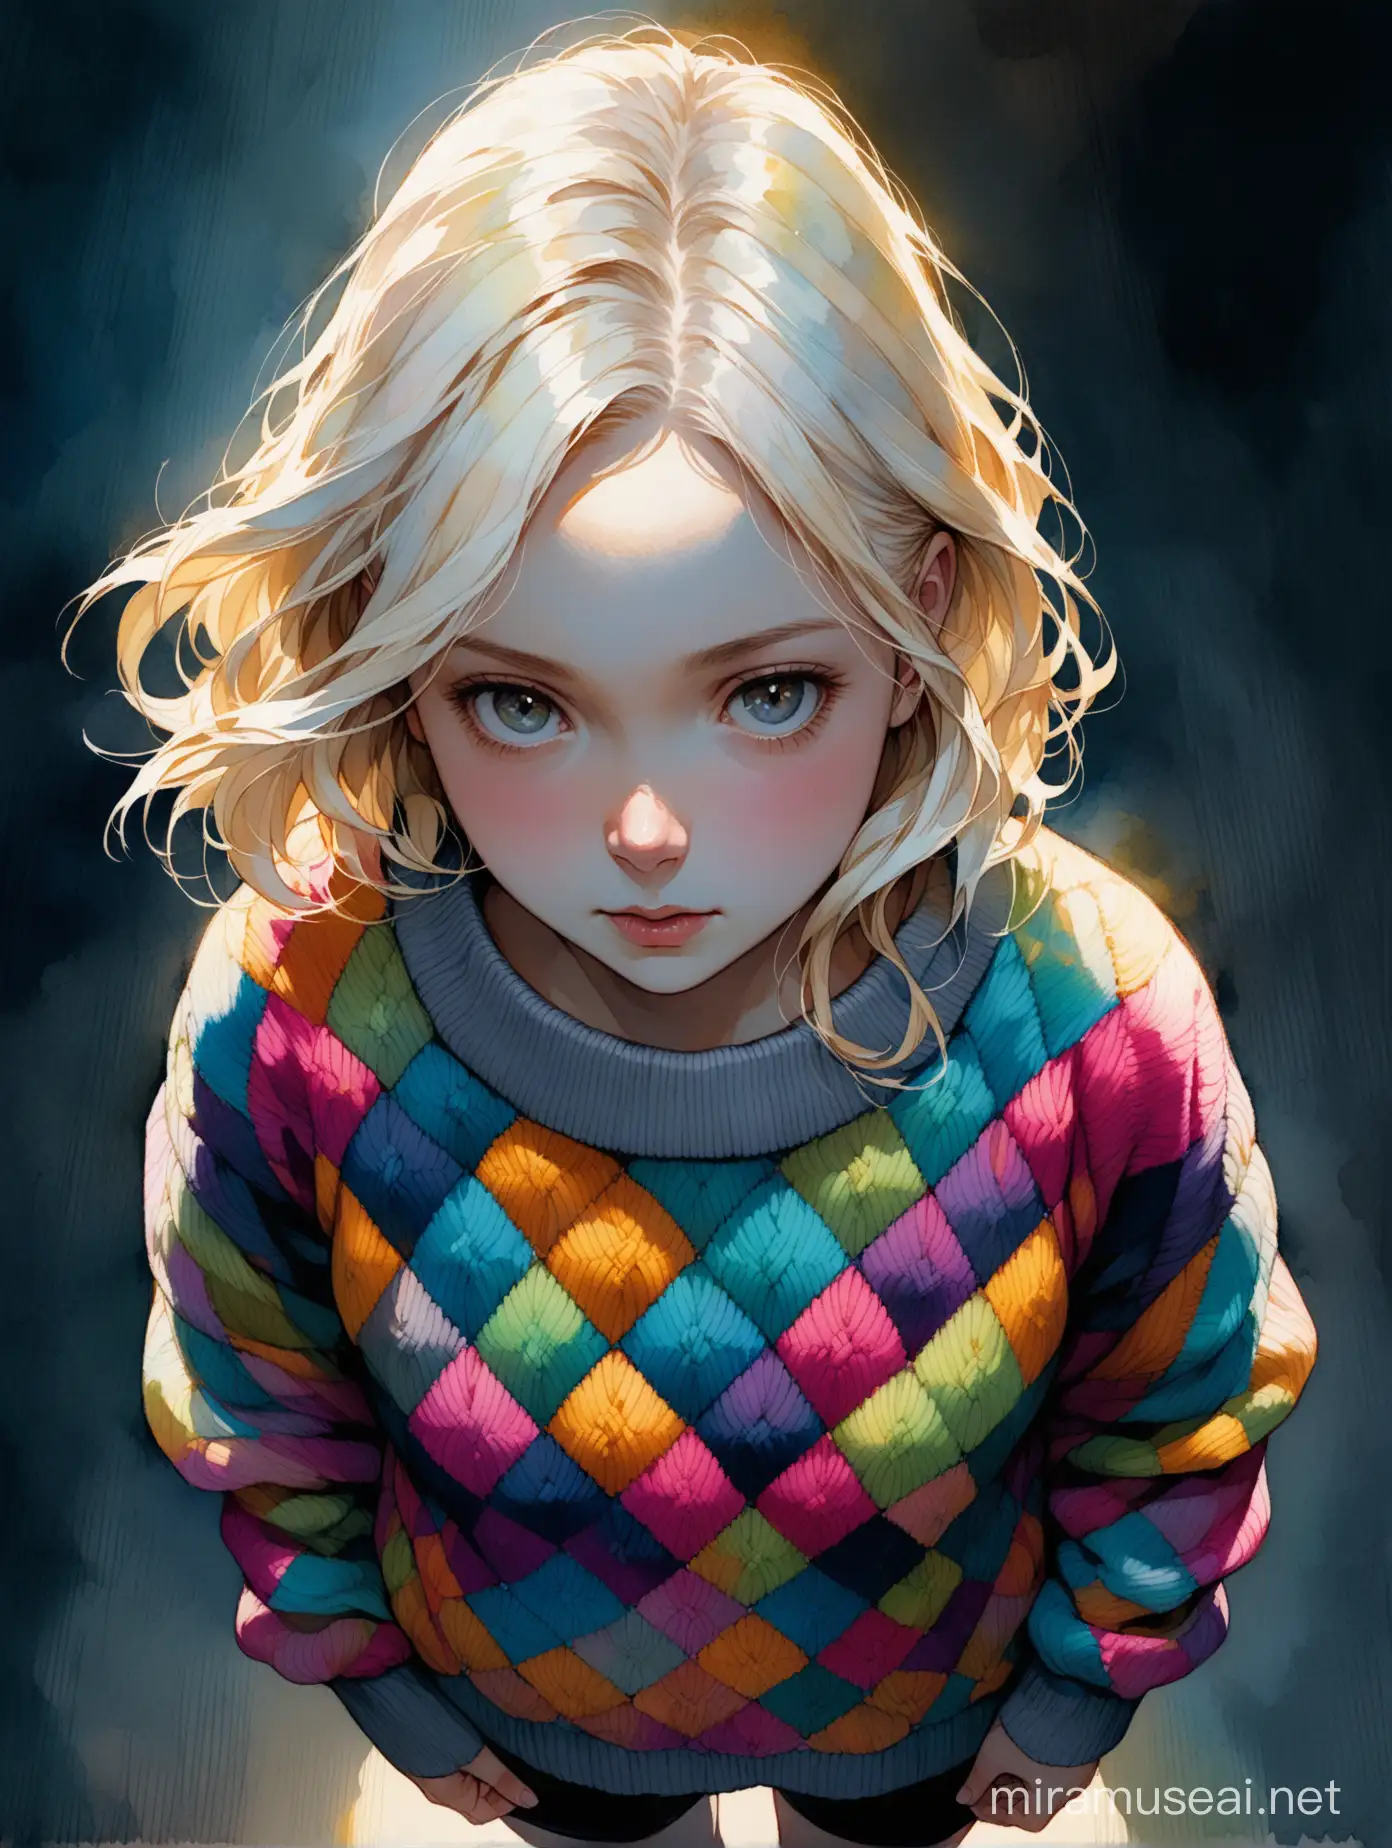 Young Emma Myers as Enid Sinclar in Colorful Patchwork Knit Sweater